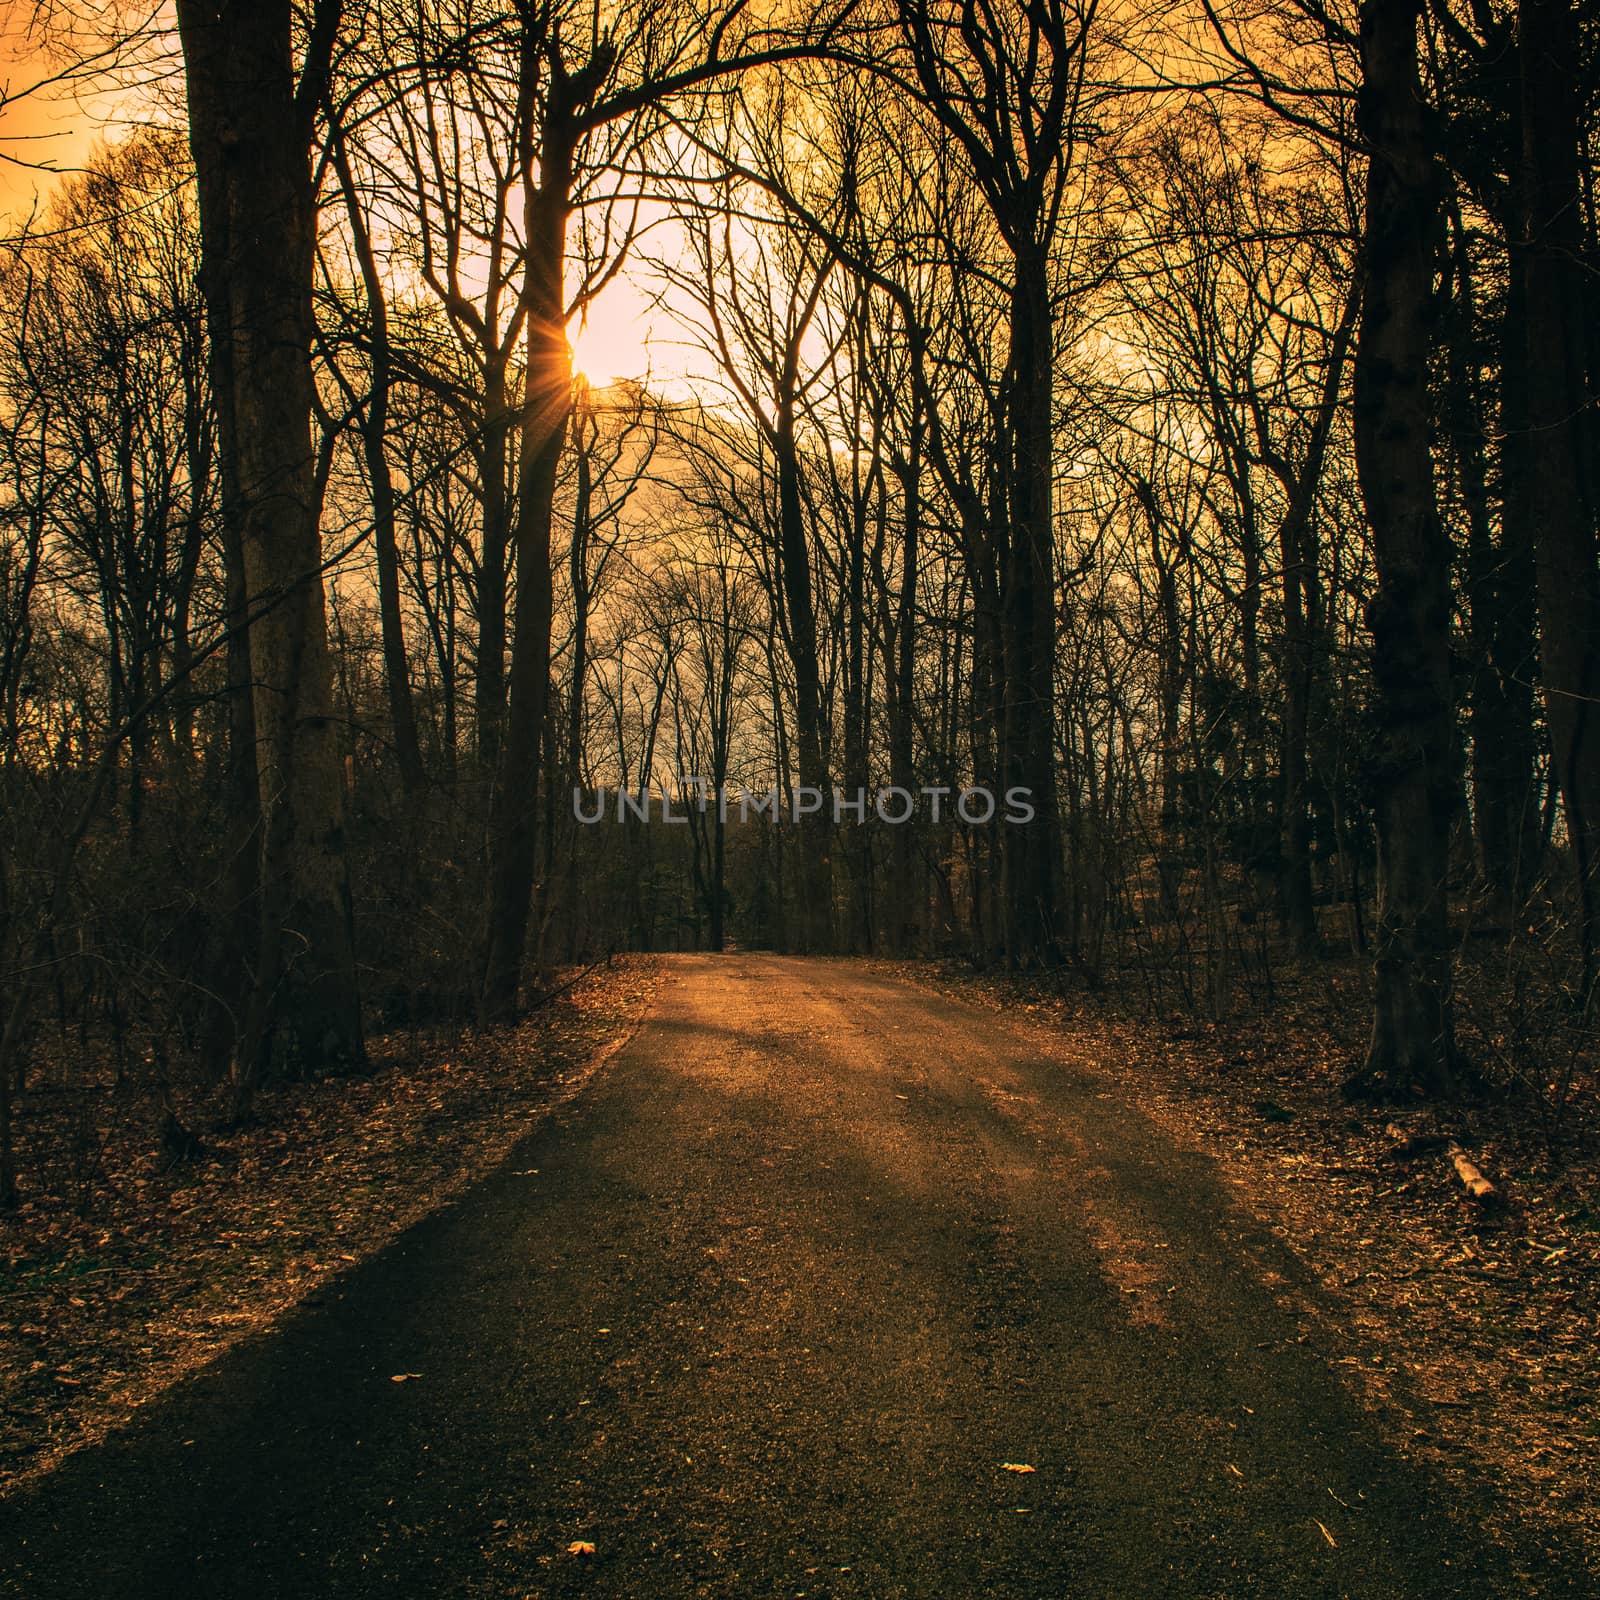 A Blacktop Path in a Dead Winter Forest With a Bright Sunset Beh by bju12290